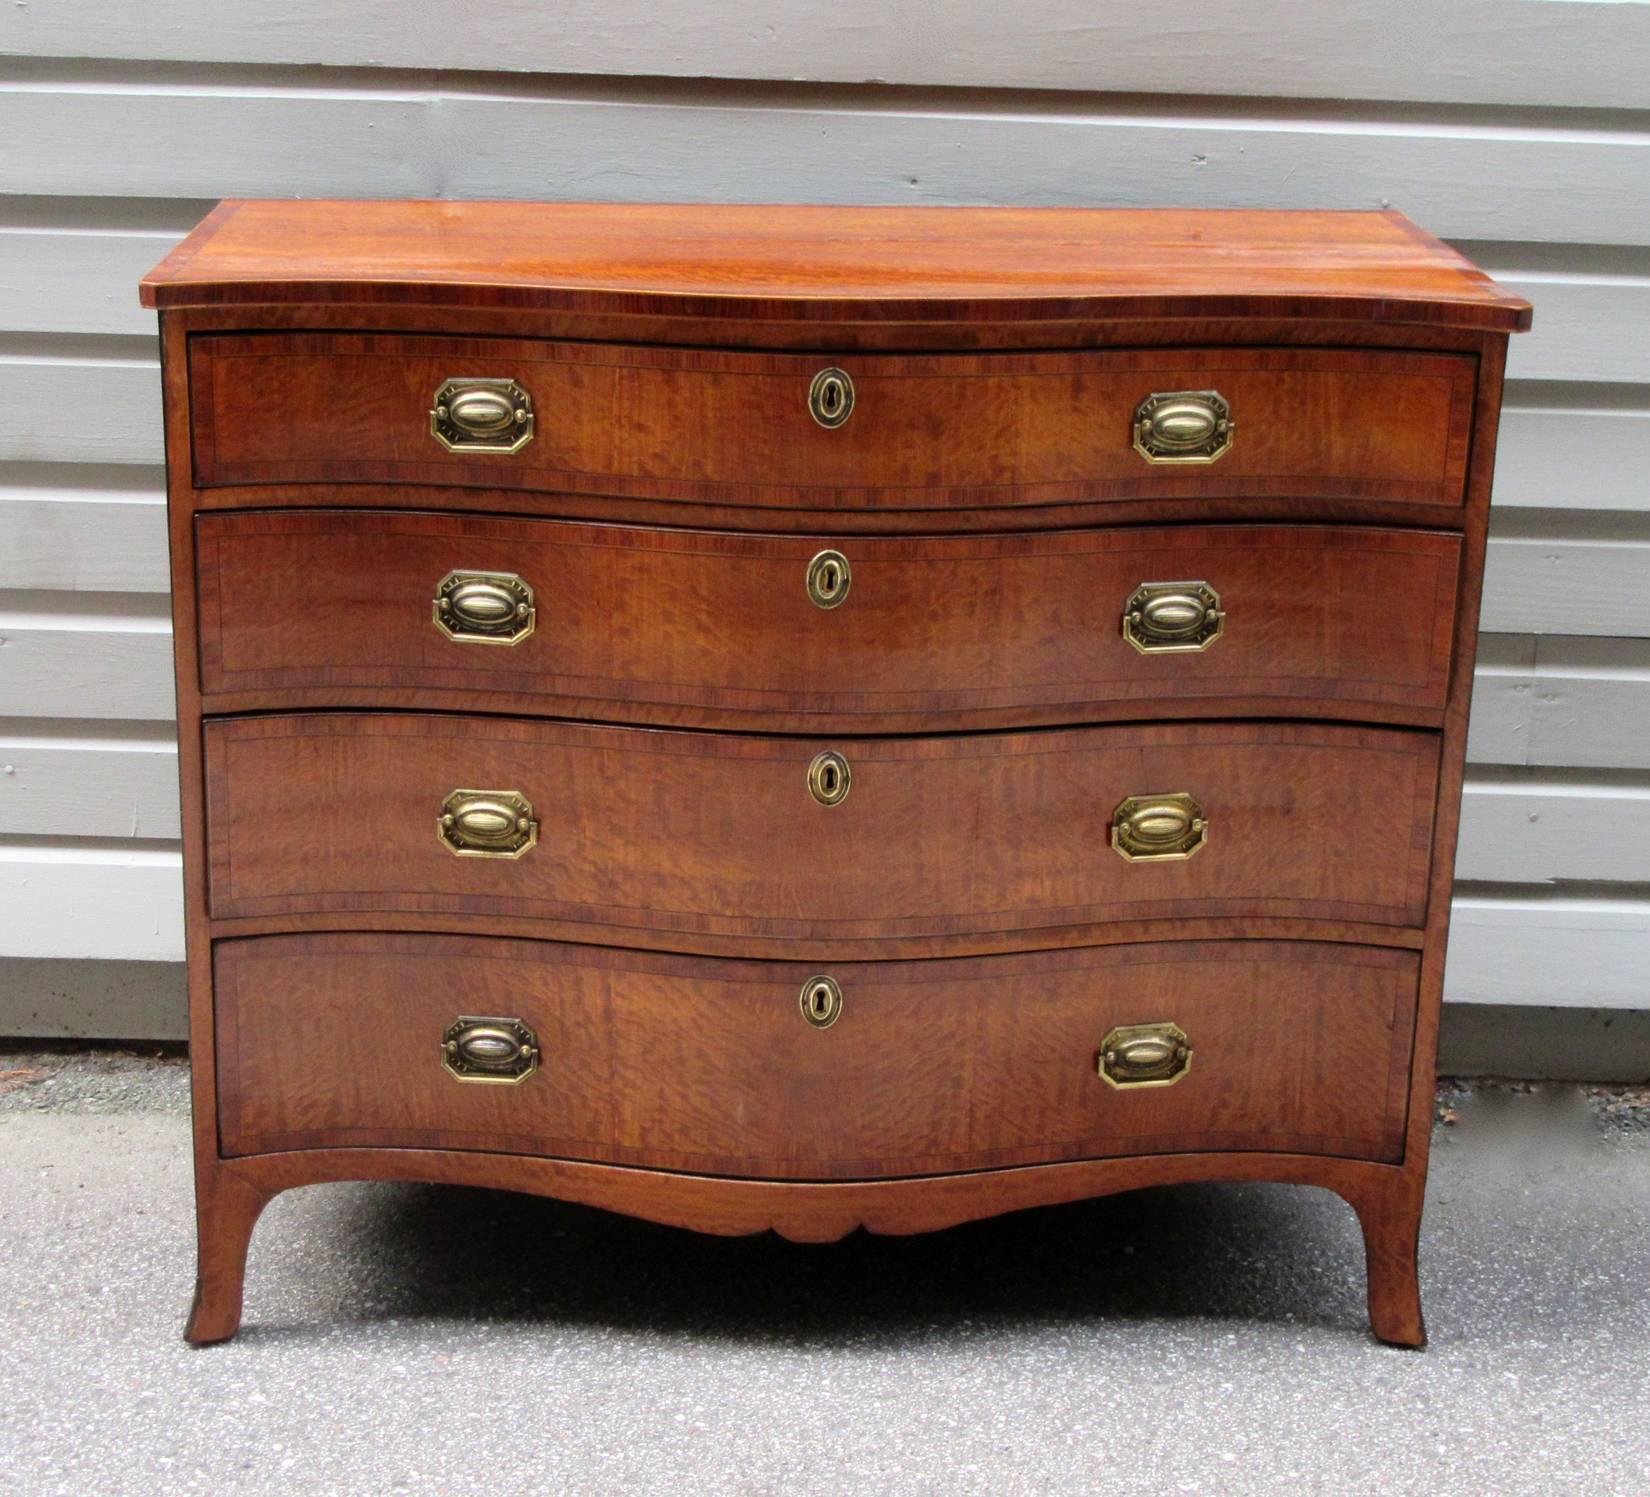 A period English Georgian satinwood serpentine chest of drawers, circa 1780, featuring four drawers, a top drawer with three dividers, French feet and original brass pulls. The chest is in excellent condition.